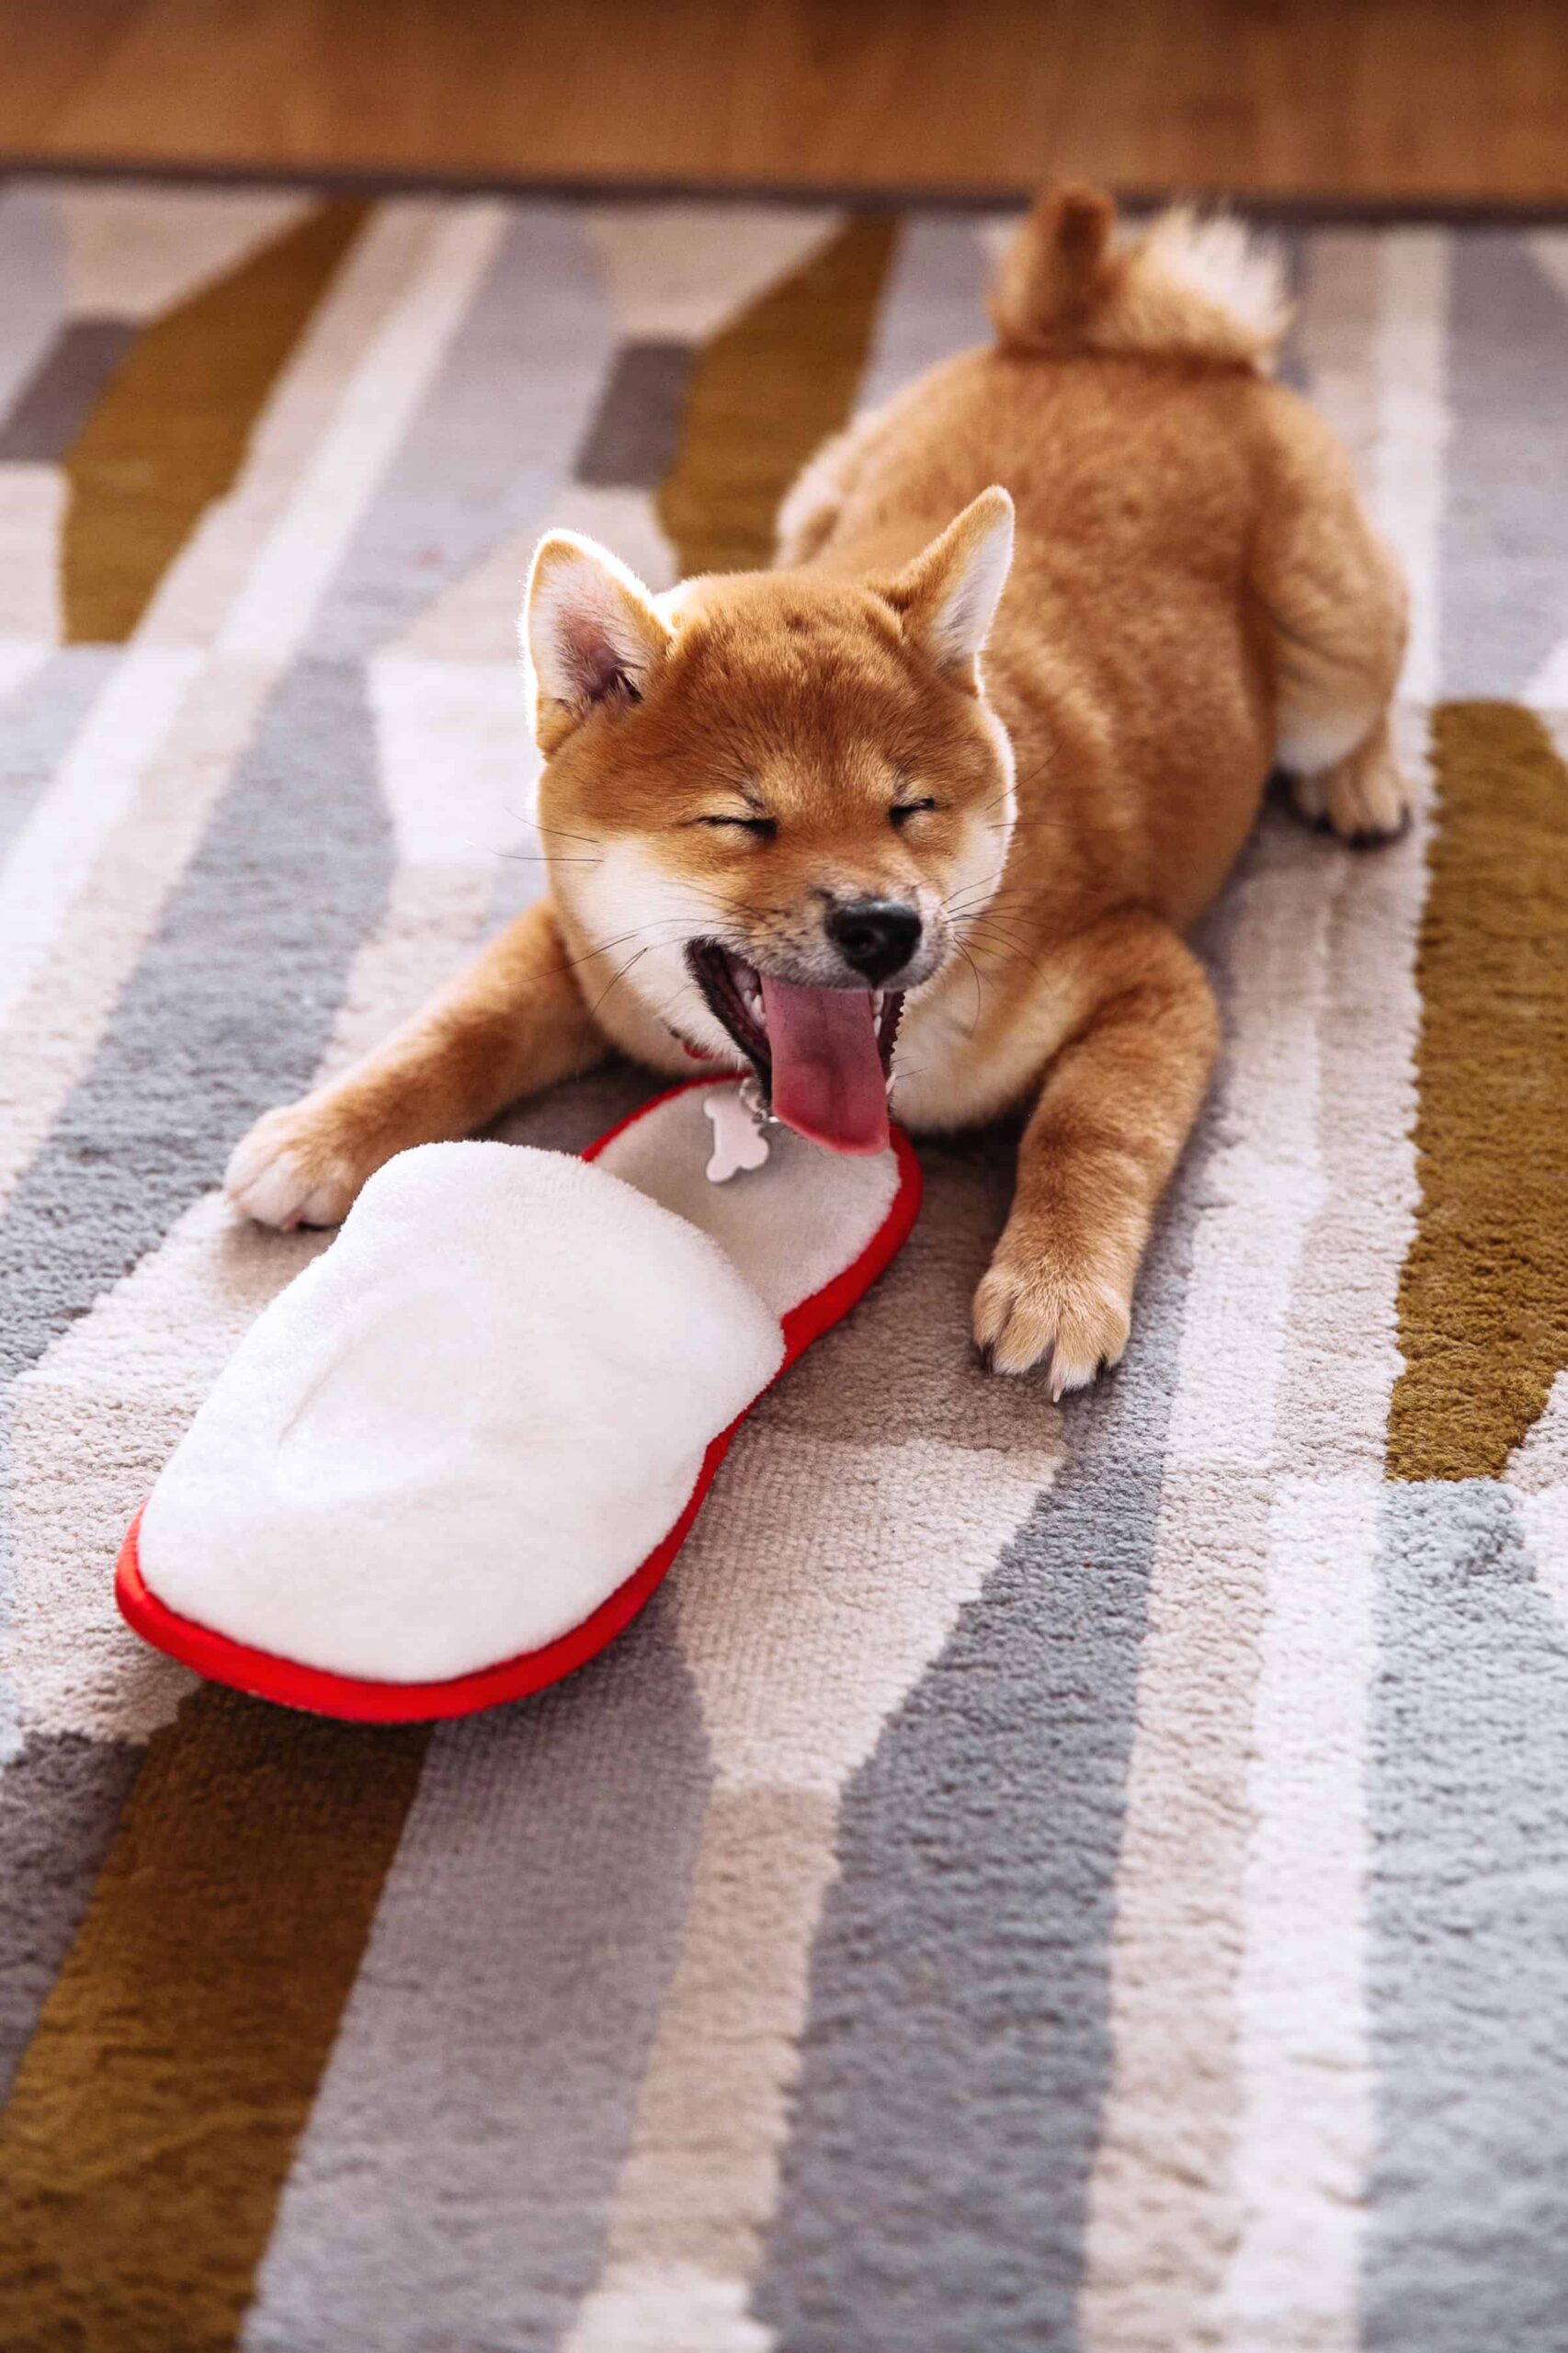 shiba inu puppy playing and smiling with a slipper